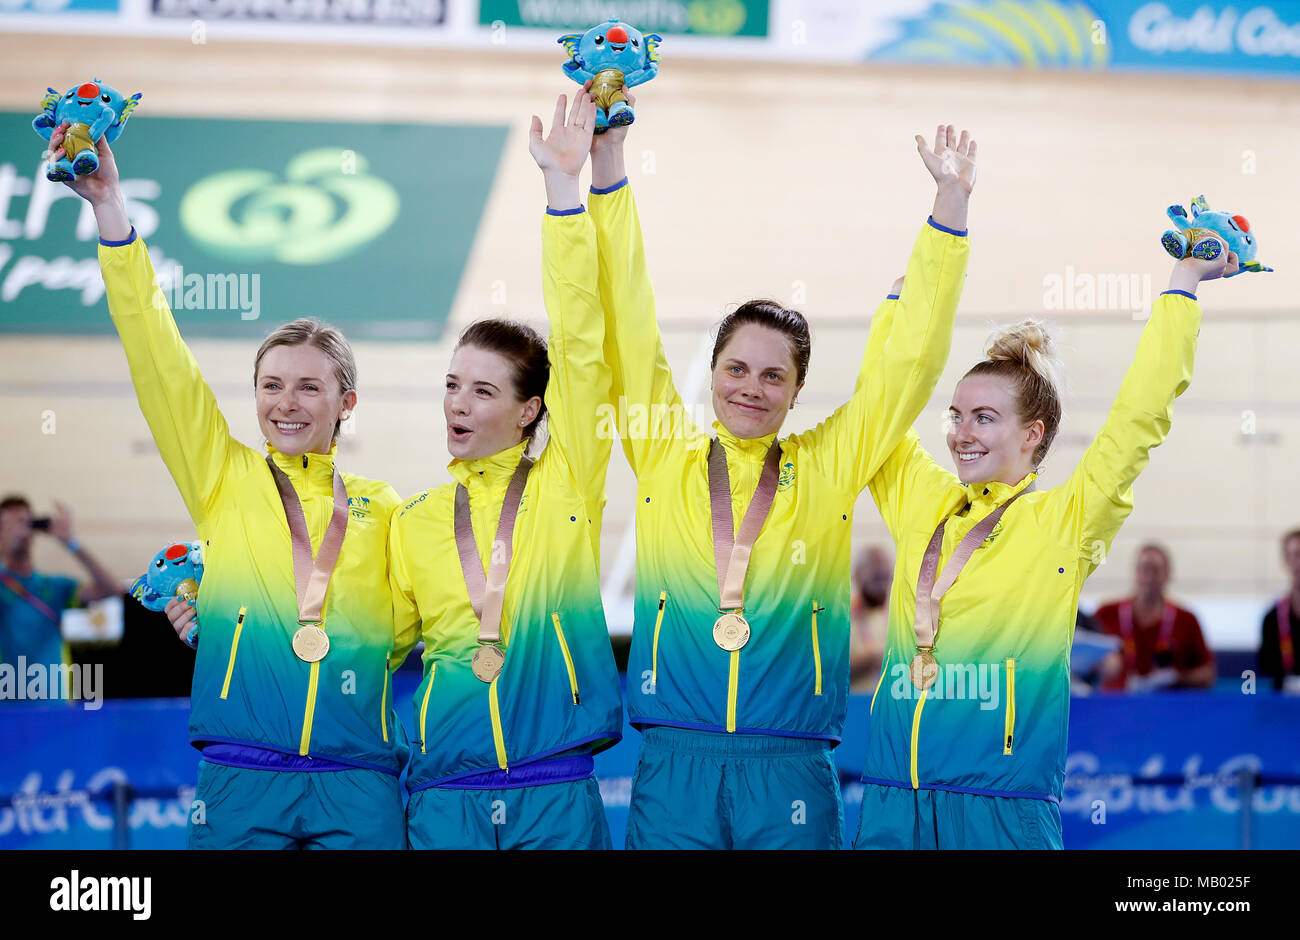 Left to right, Australia's Annette Edmondson, Amy Cure, Ashlee Ankudinoff and Alexandra Manly celebrate on the podium with their medals after winning gold in the Women's 4000m Team Pursuit Finals at the Anna Meares Velodrome during day one of the 2018 Commonwealth Games in the Gold Coast, Australia. Stock Photo